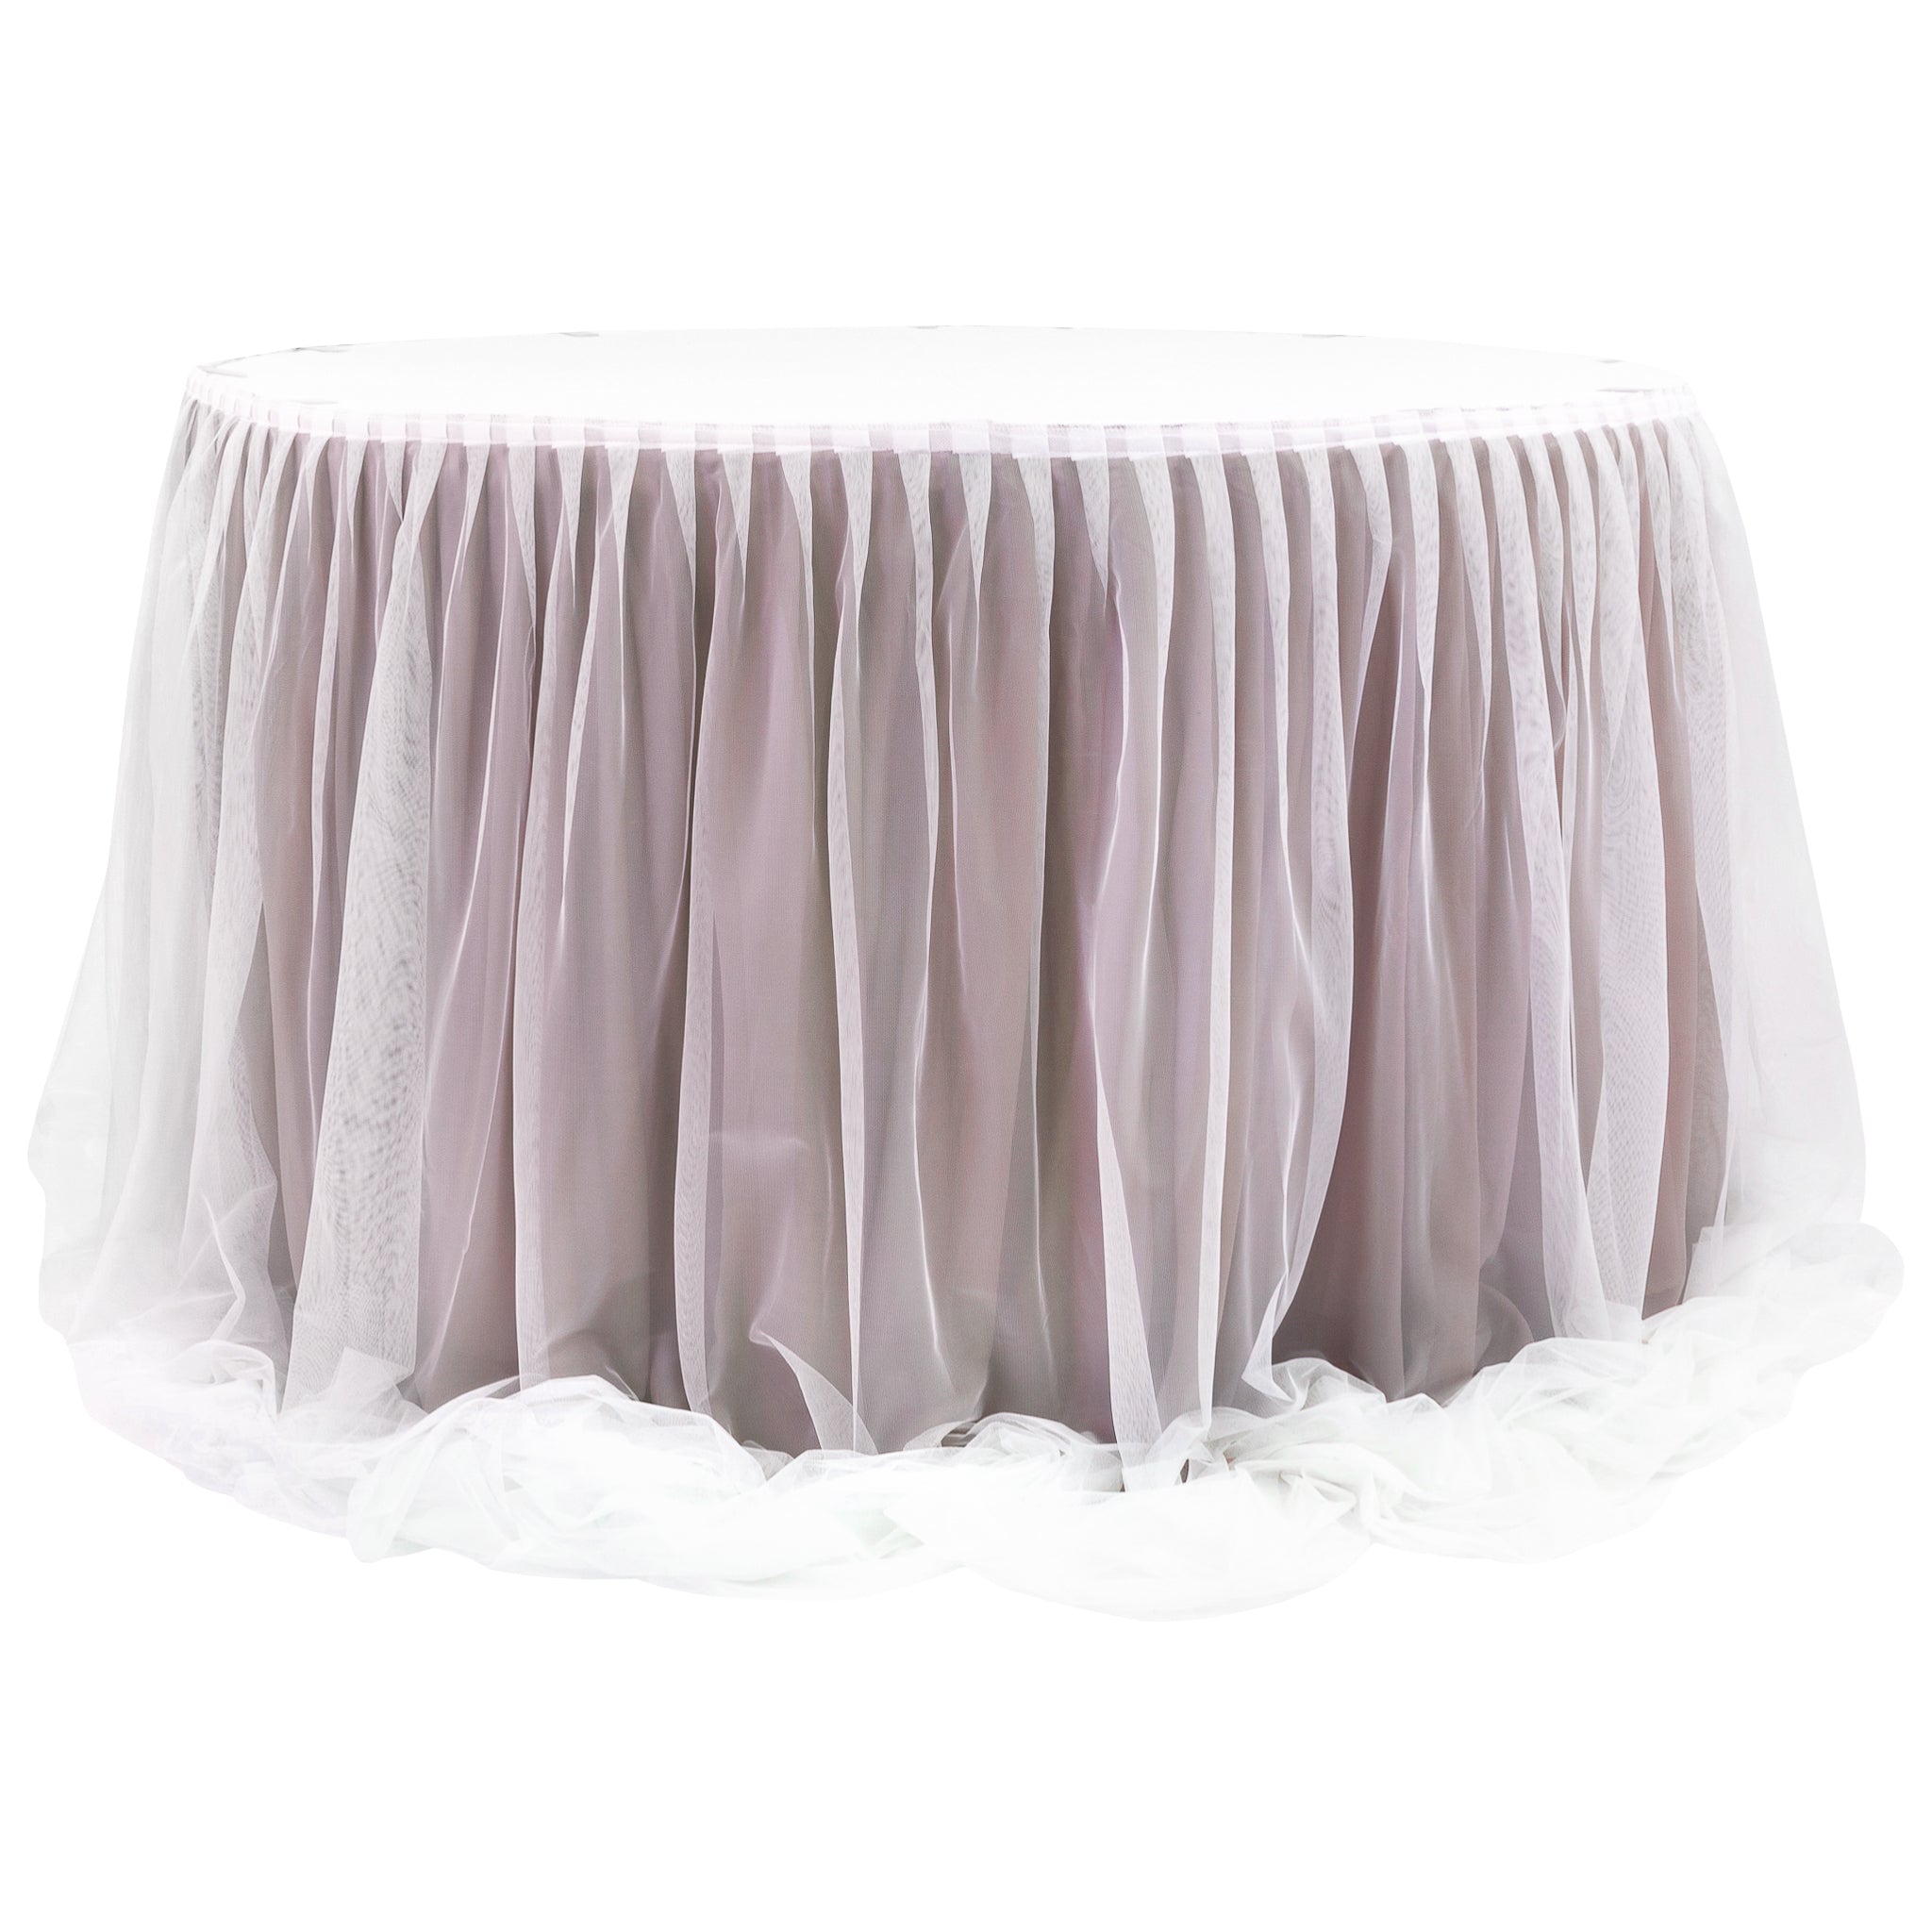 Chiffon Tulle Table Skirt Extra Long 57 X 14ft Dusty Rosemauve And W Cv Linens 1270